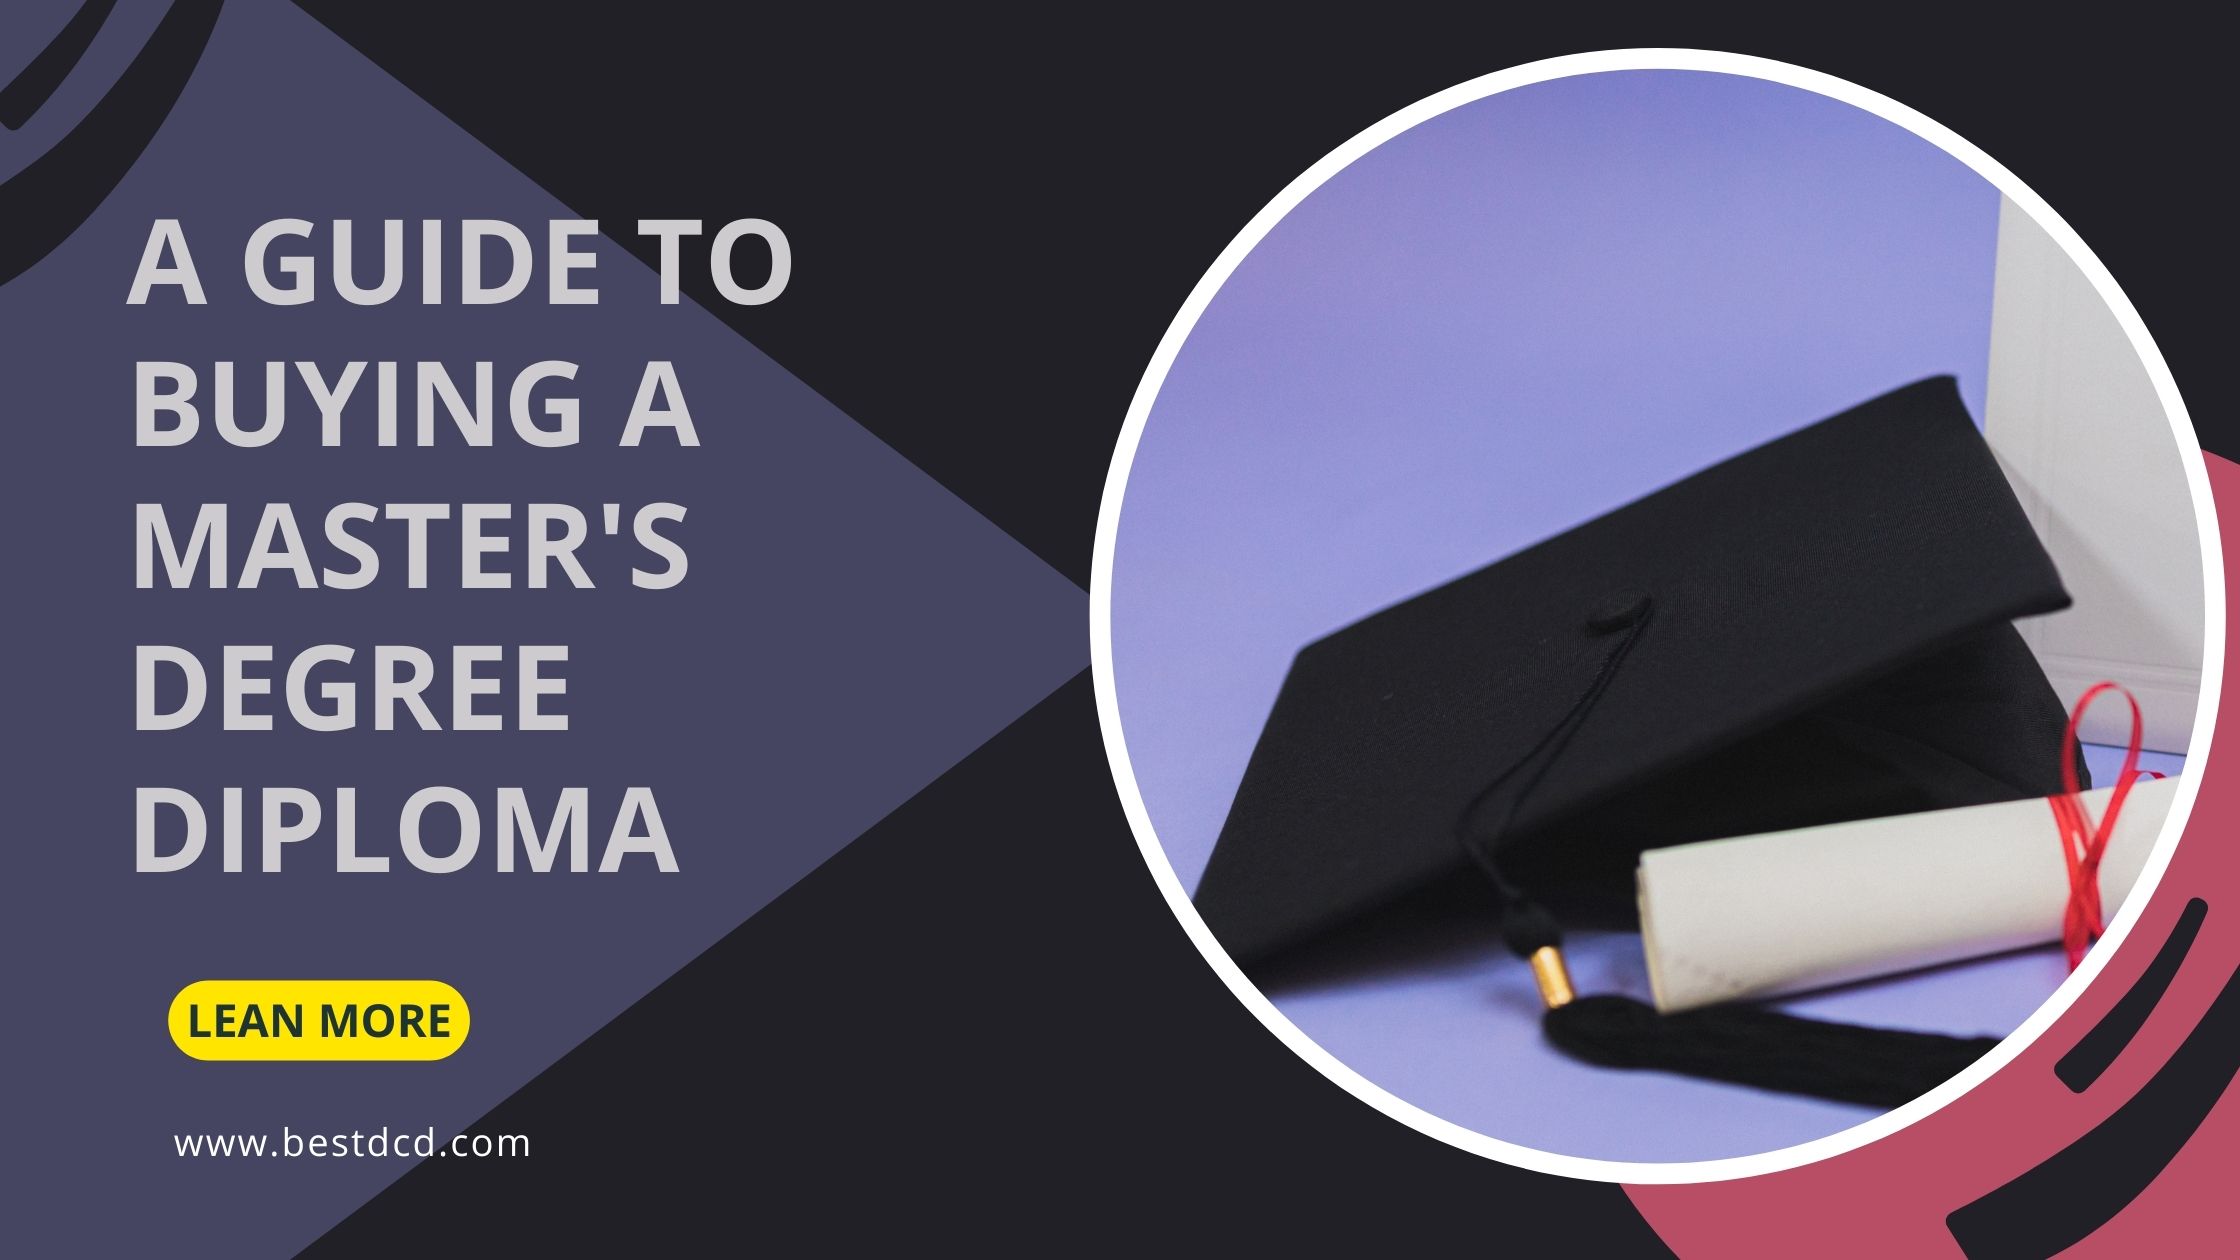 A Guide To Buying A Master's Degree Diploma